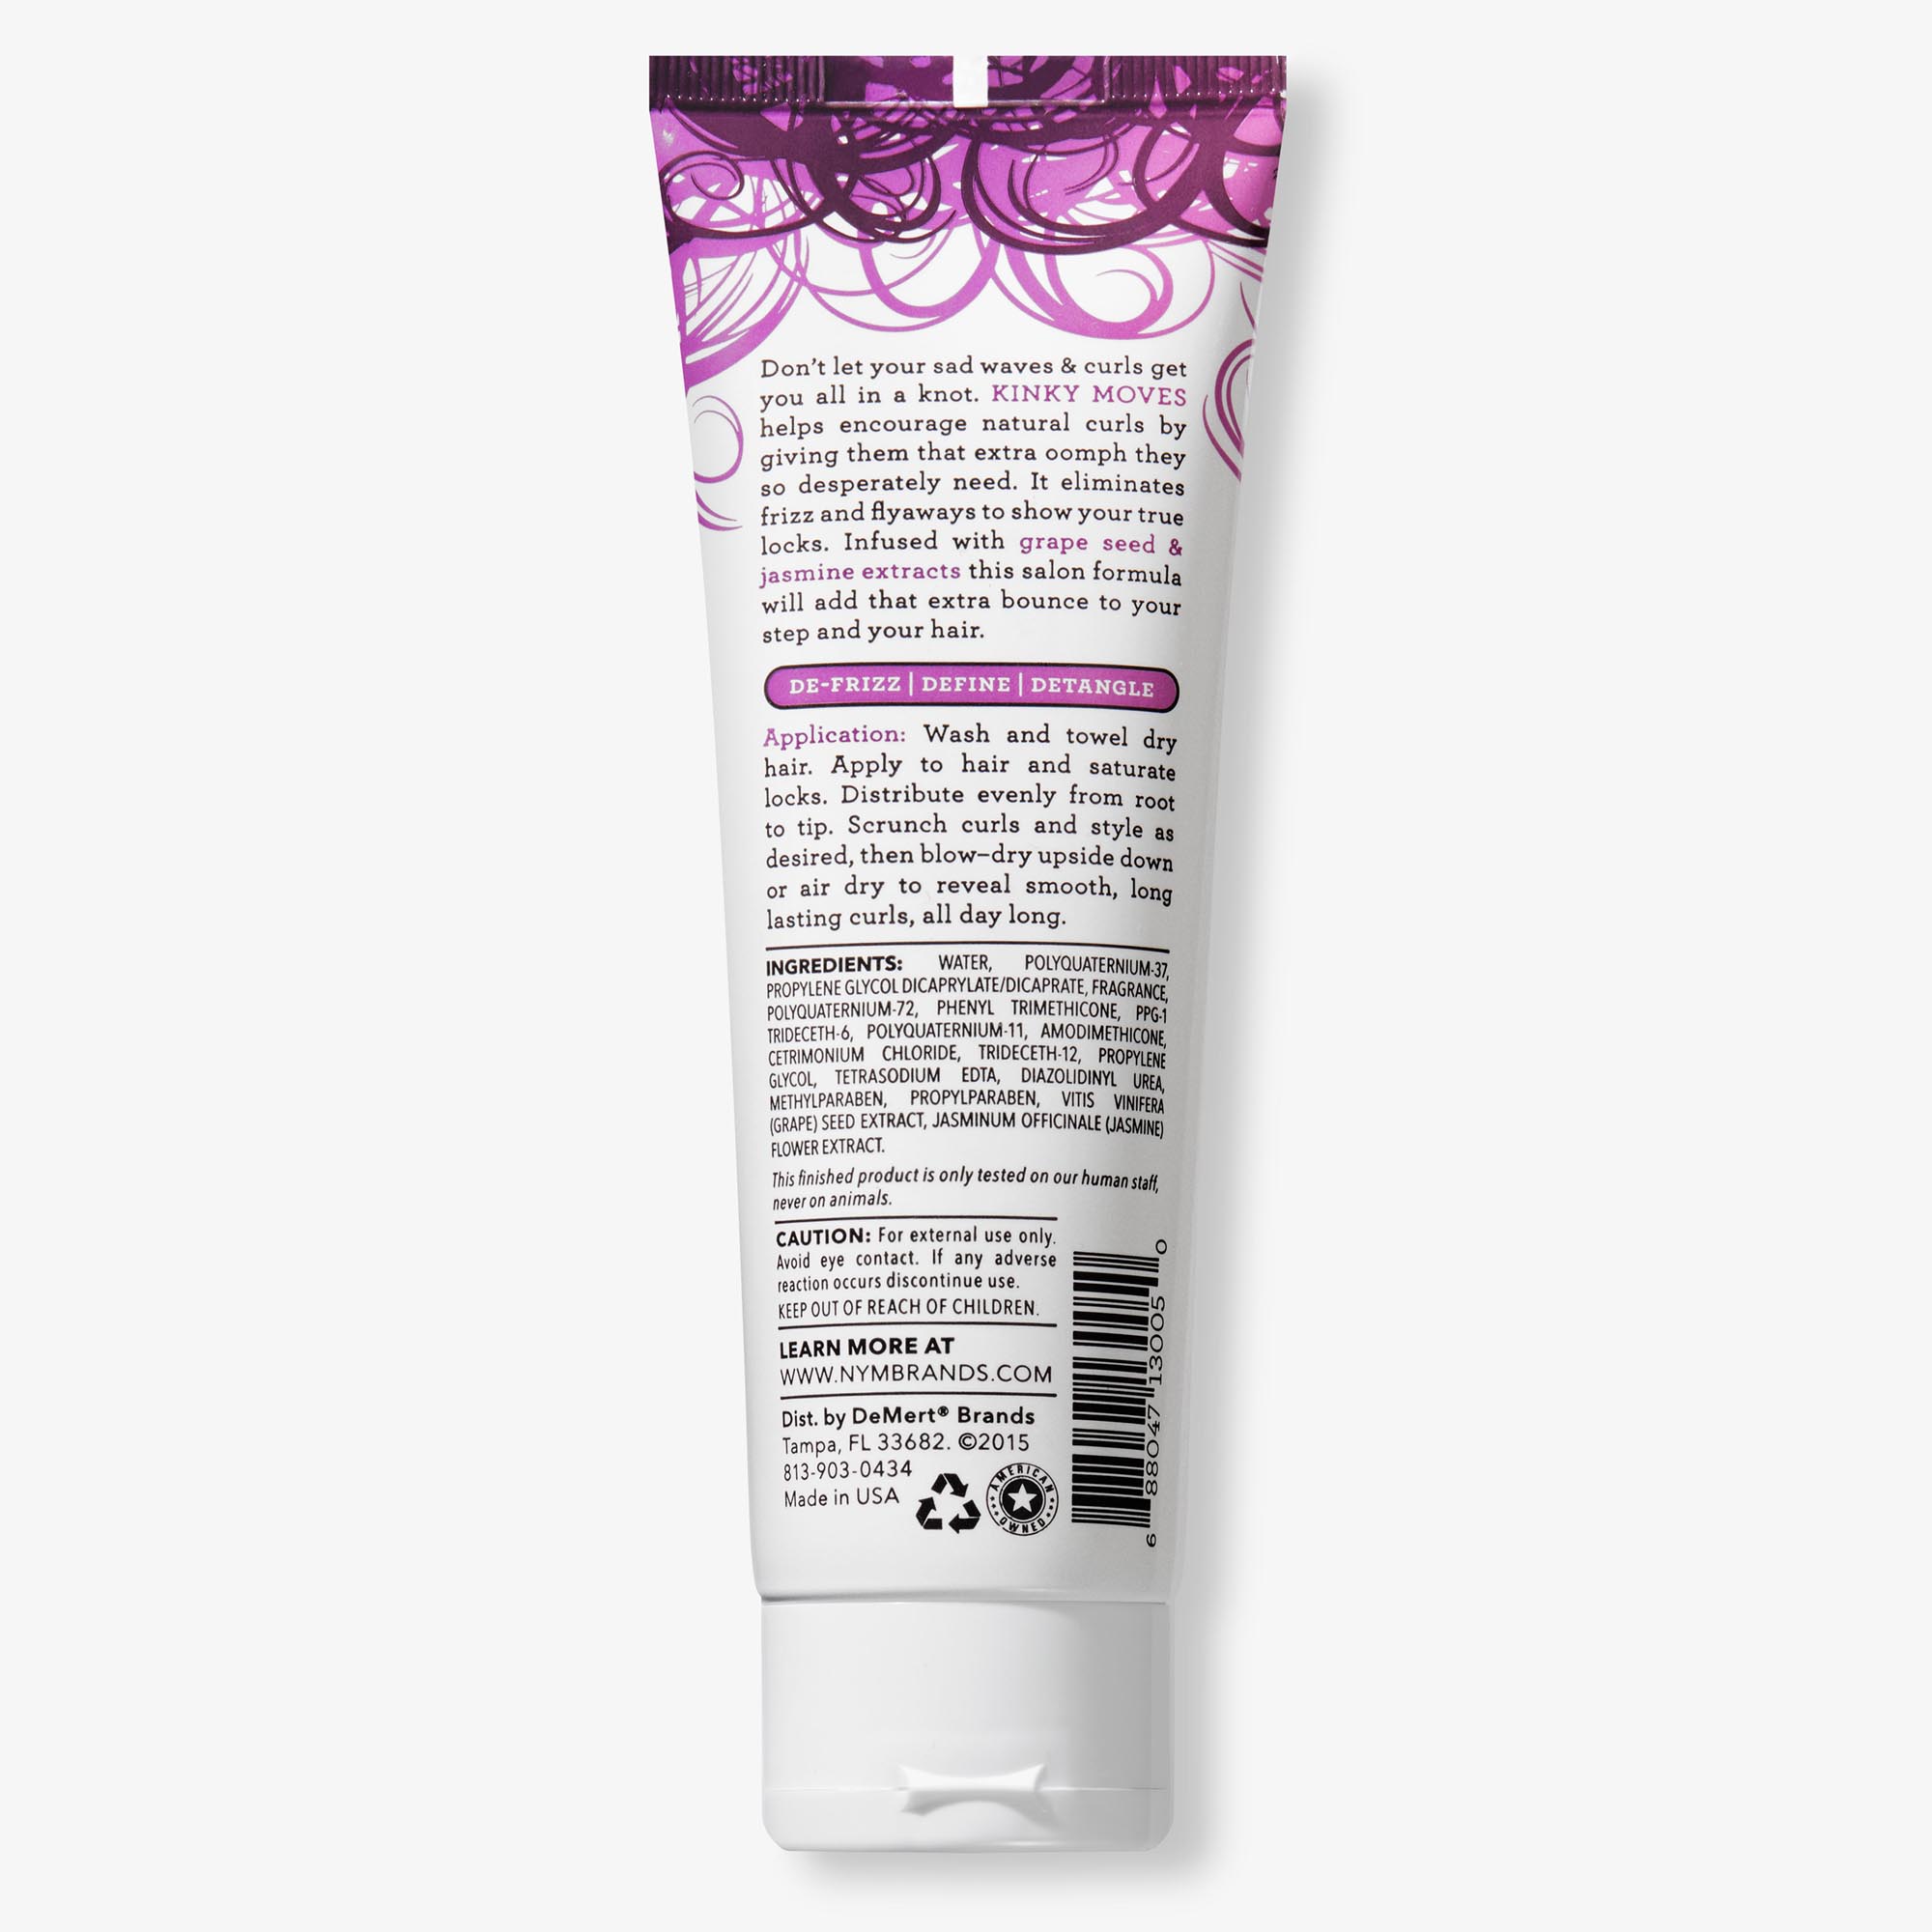 Not Your Mother's Kinky Moves Curl Defining Hair Cream to Enhance Natural Curls, 4 fl oz - image 6 of 10